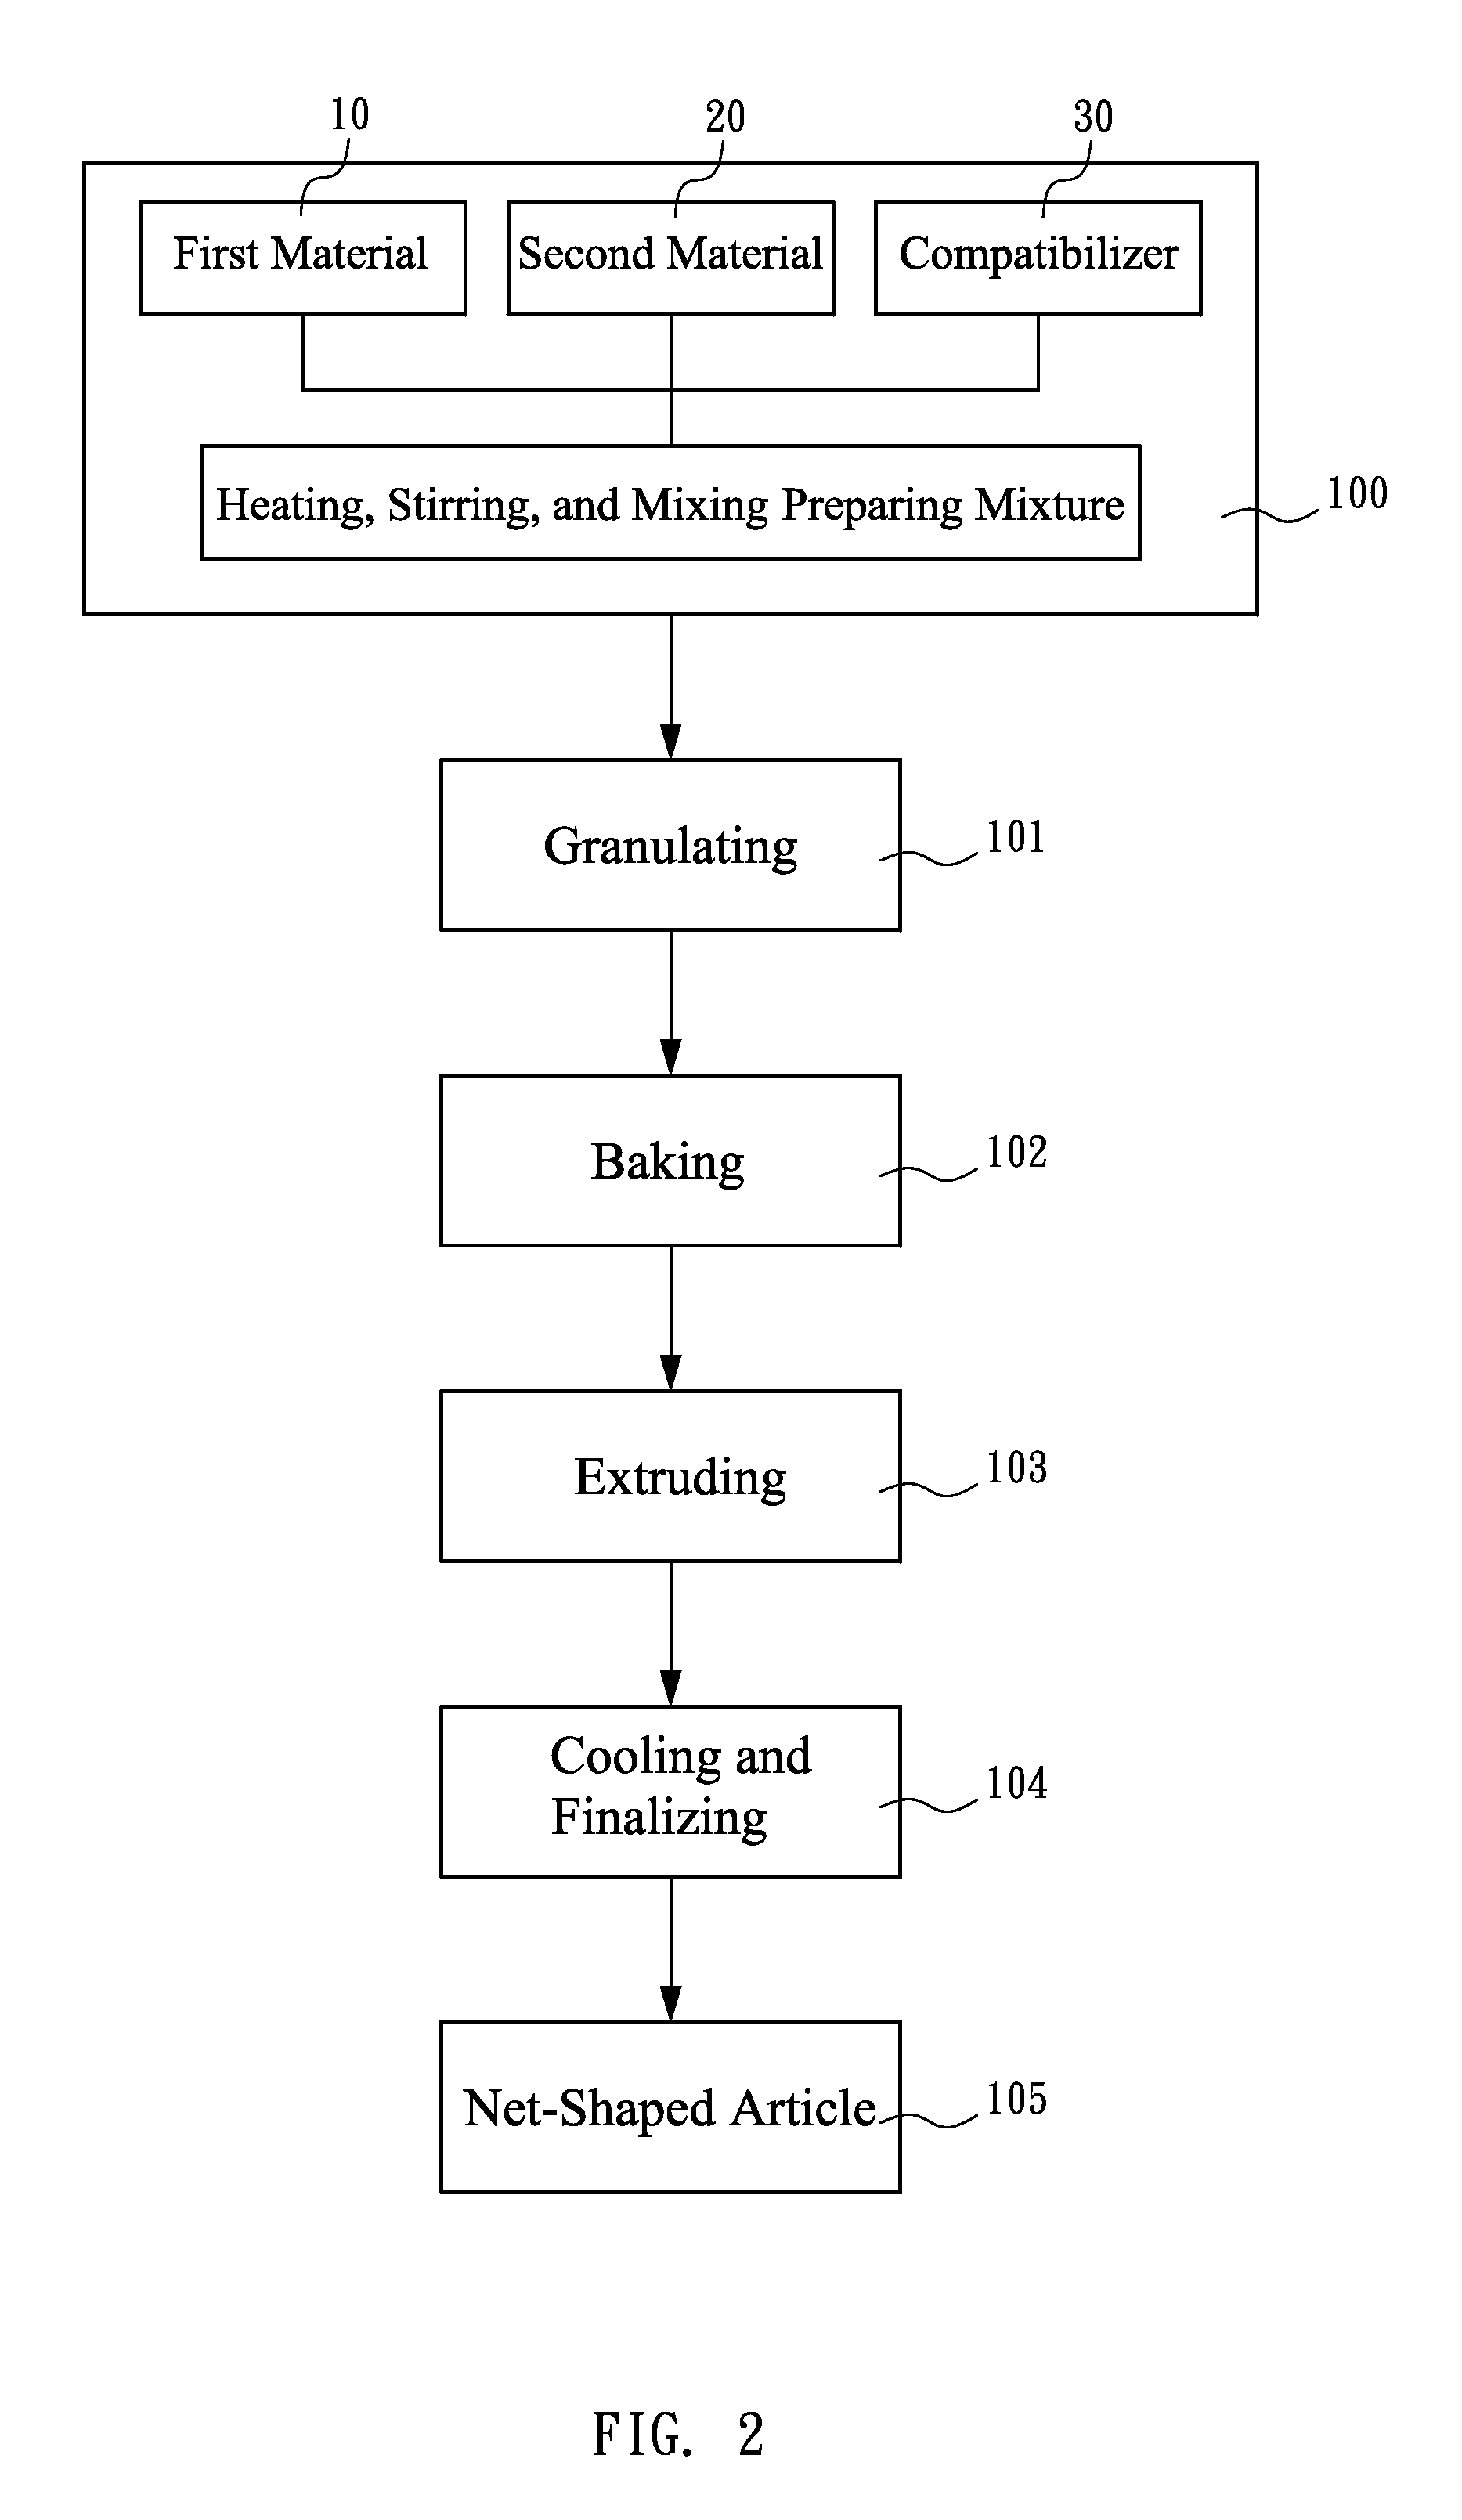 Manufacturing method of biodegradable net-shaped articles